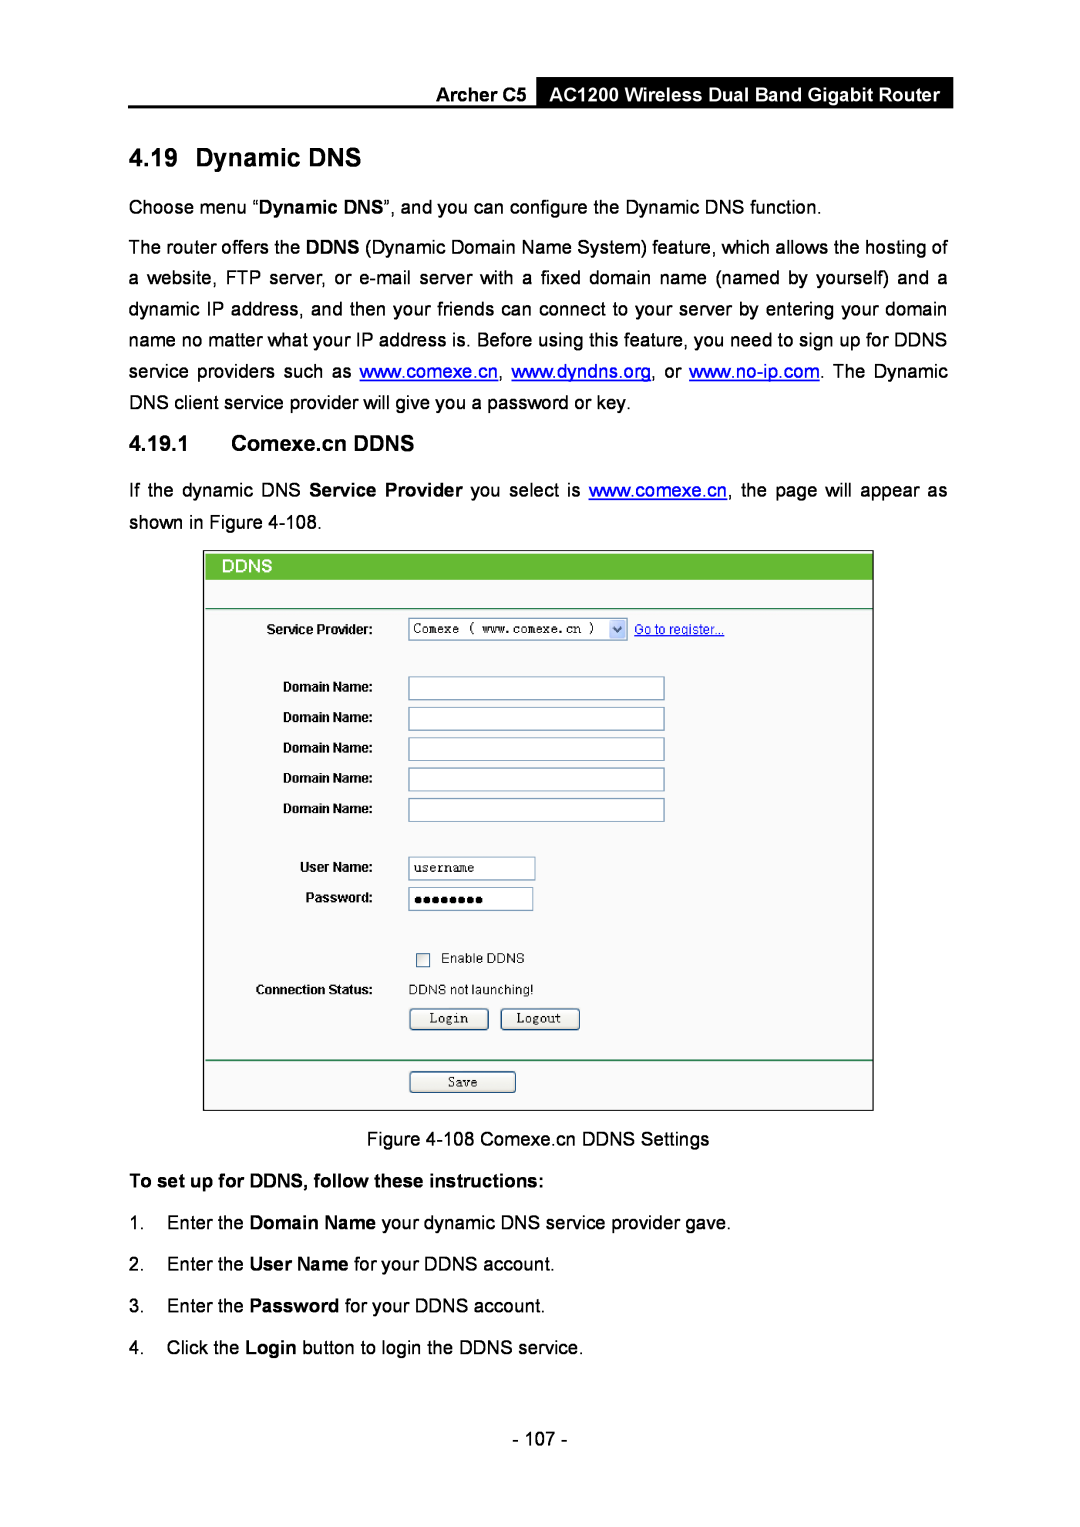 TP-Link AC1200 manual Dynamic DNS, Comexe.cn DDNS, To set up for DDNS, follow these instructions 